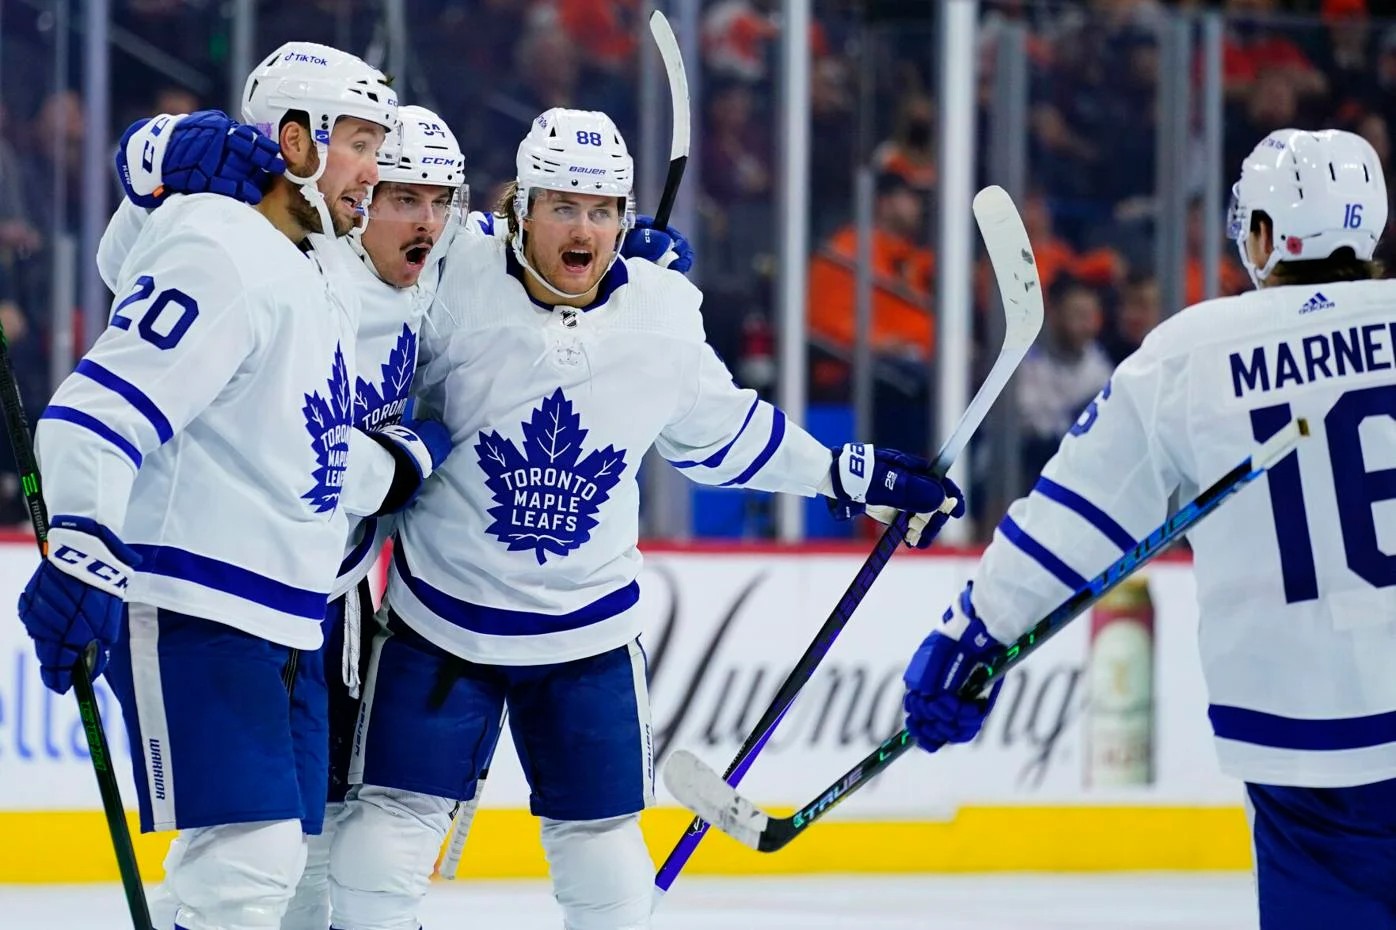 Toronto Maple Leafs partially get it right with new jersey design